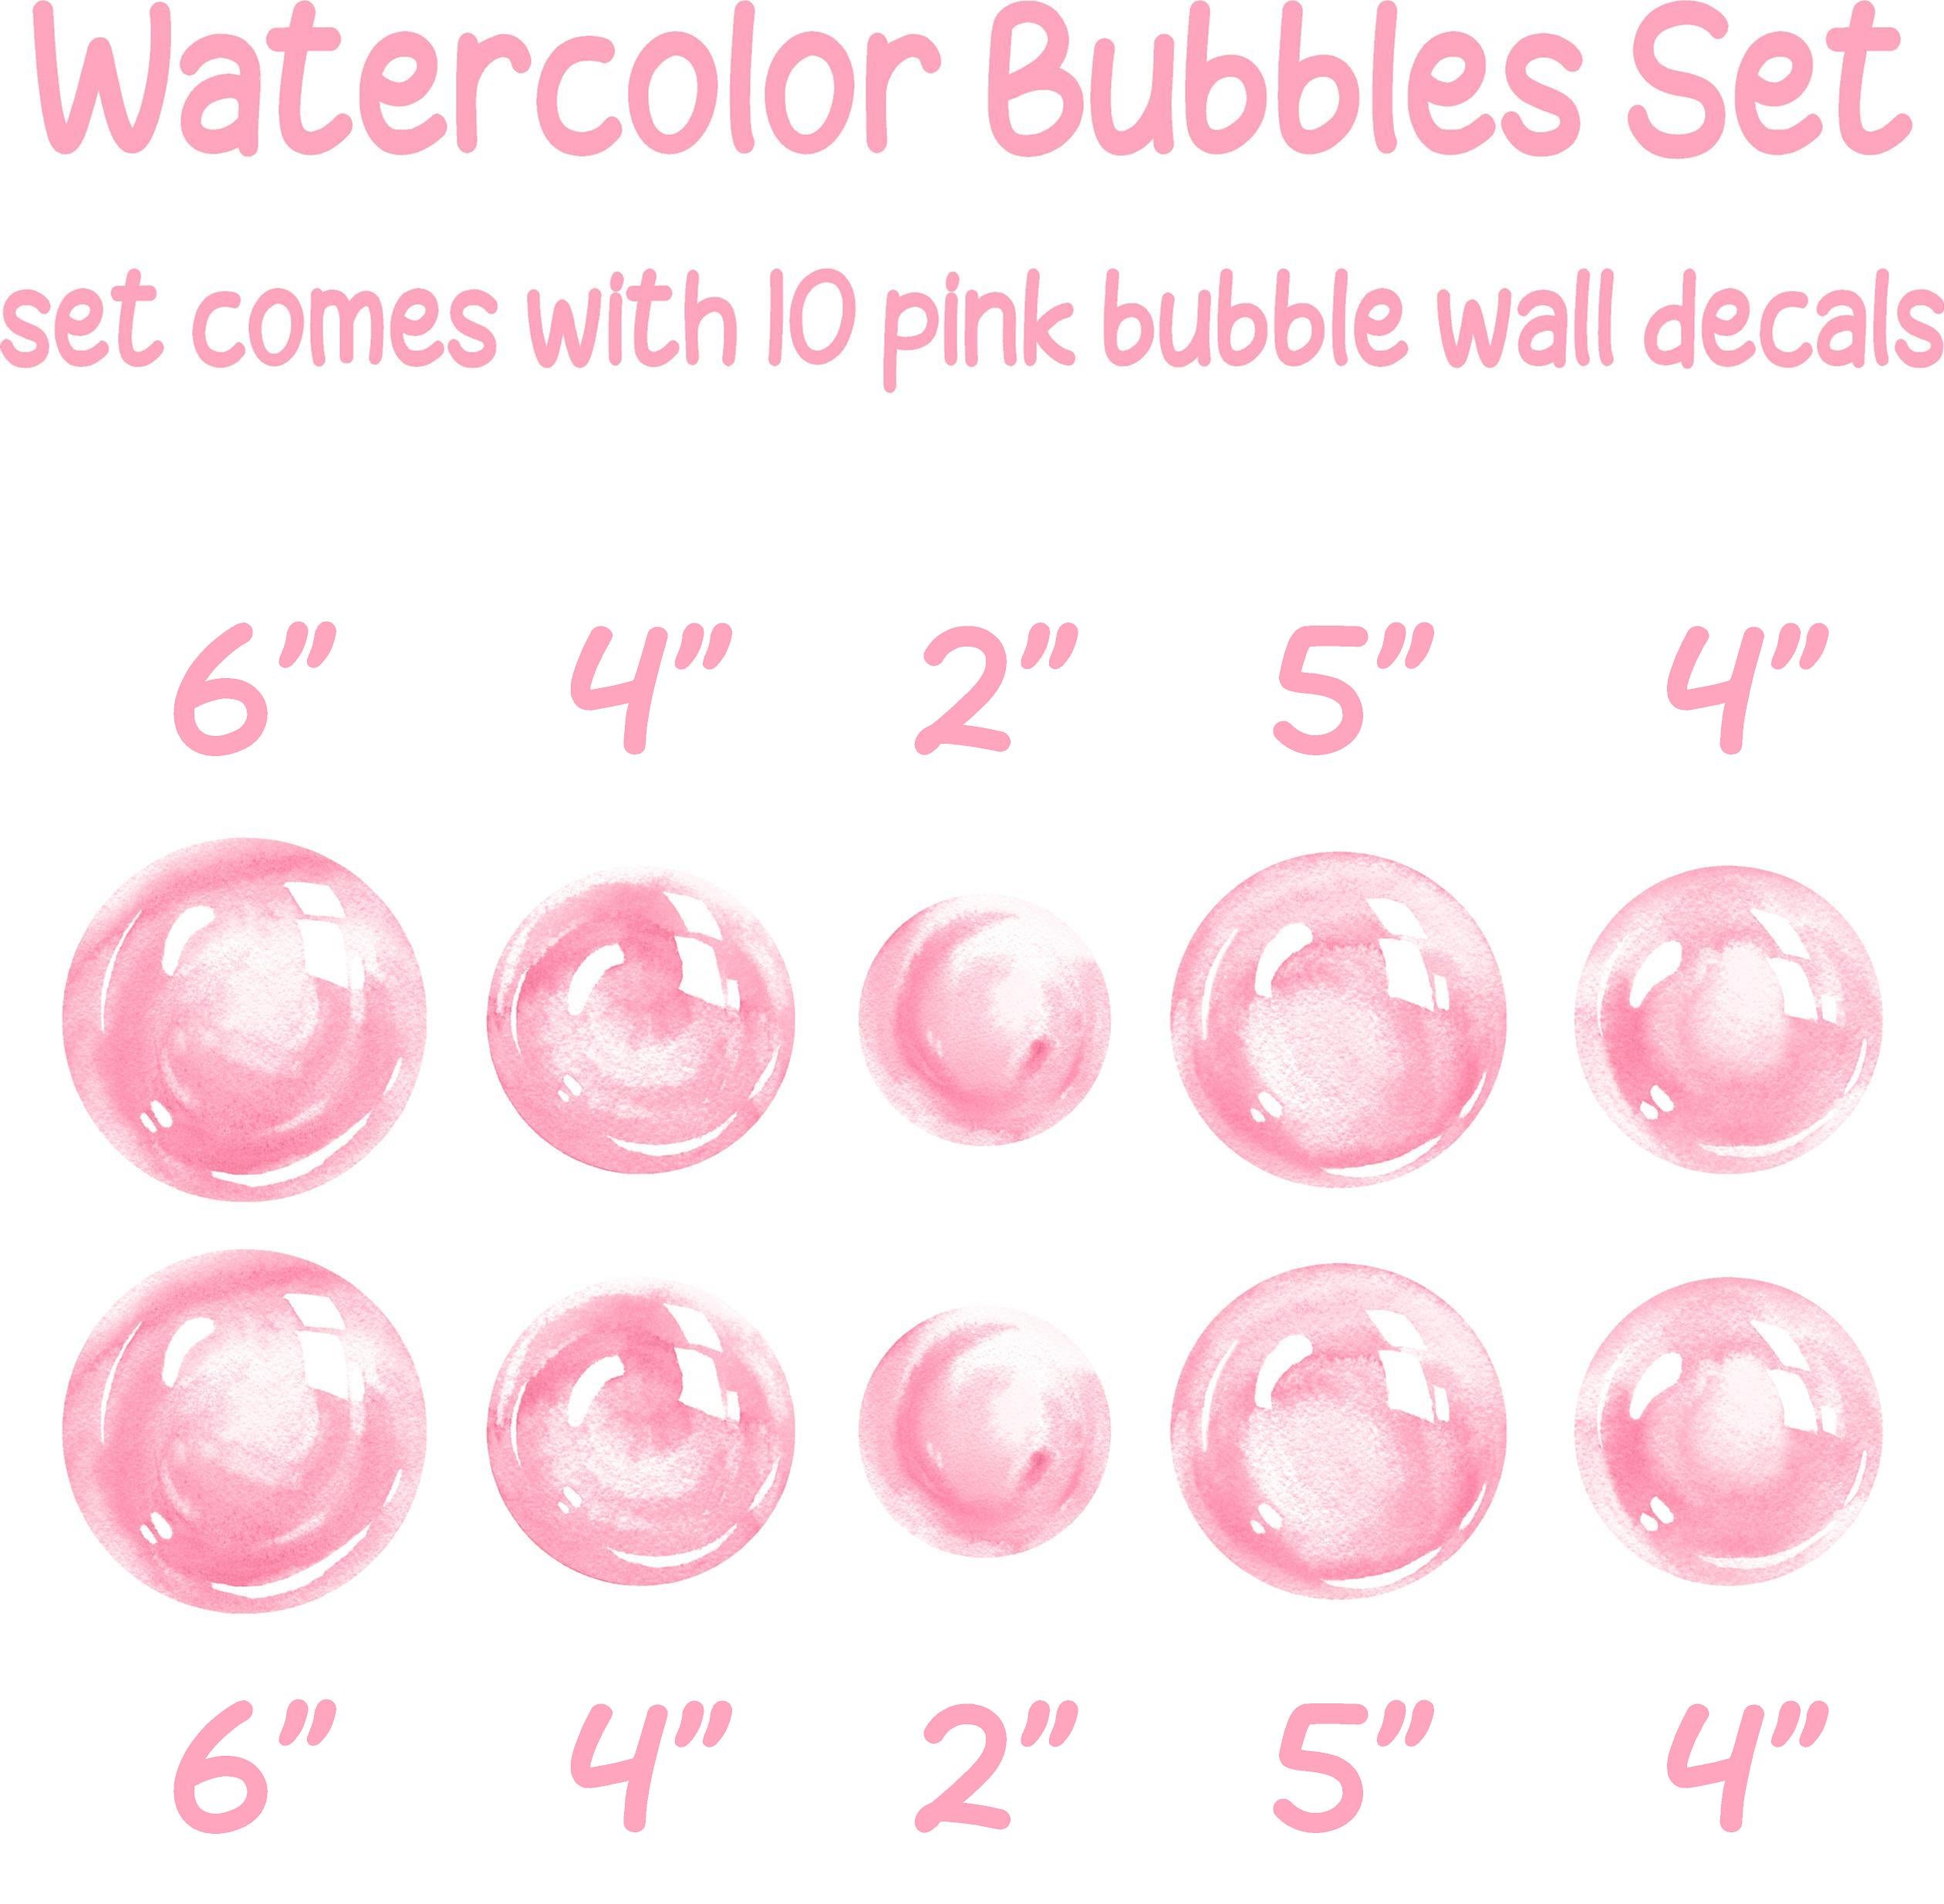 Watercolor Pink Bubbles Wall Decal Set Bubbles Wall Stickers Wall Art Nursery Decor Removable Fabric Vinyl Wall Stickers SIZE SMALL | DecalBaby